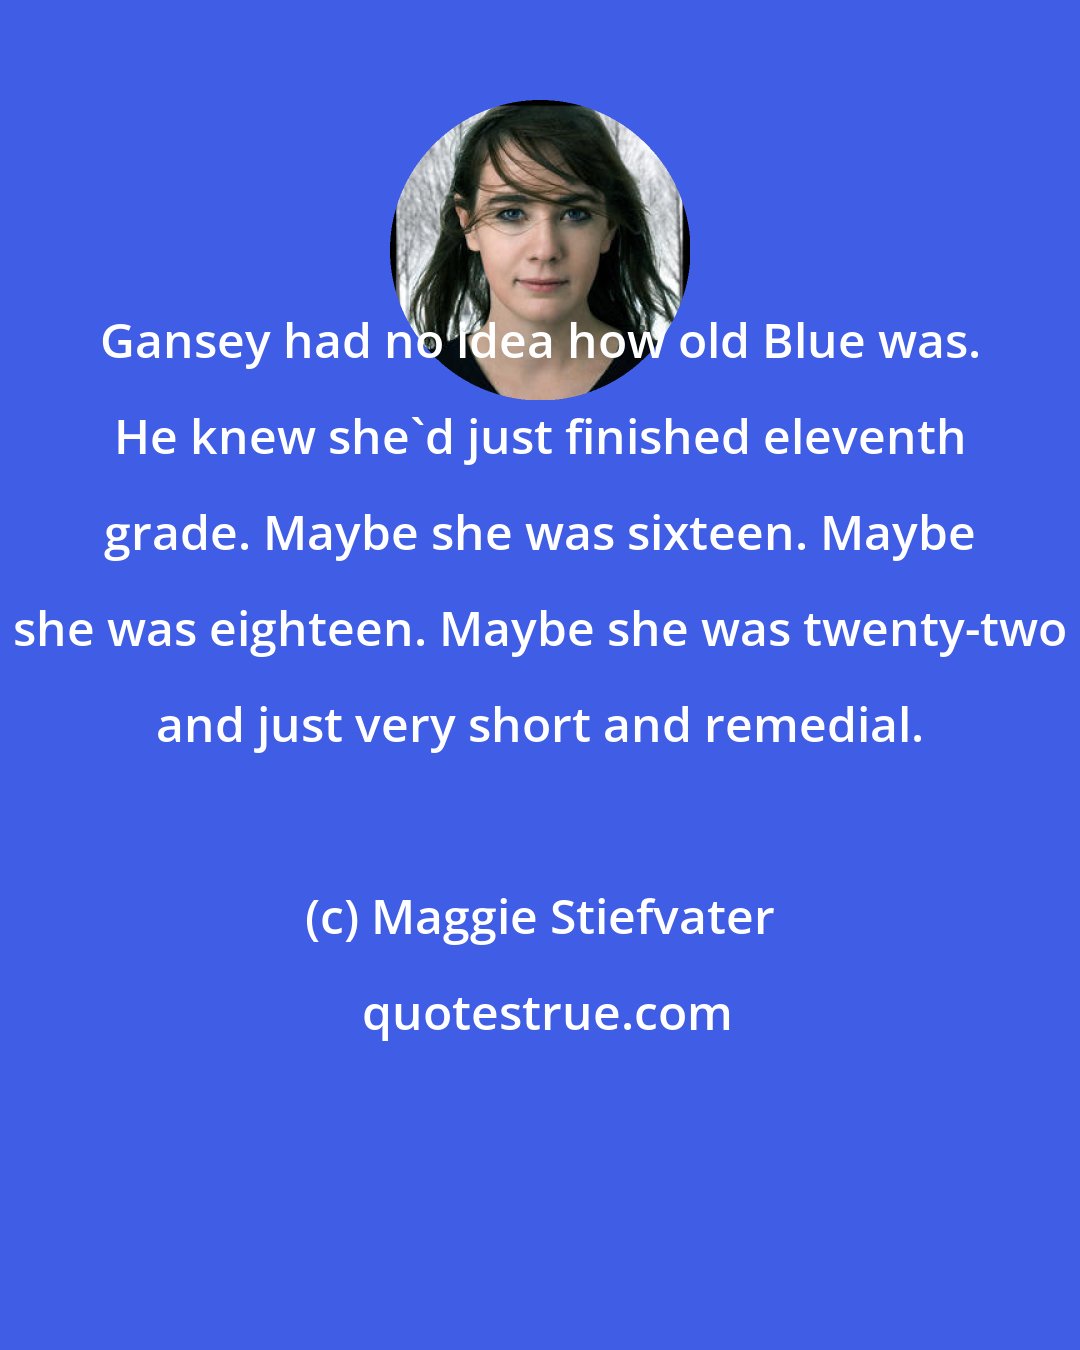 Maggie Stiefvater: Gansey had no idea how old Blue was. He knew she'd just finished eleventh grade. Maybe she was sixteen. Maybe she was eighteen. Maybe she was twenty-two and just very short and remedial.